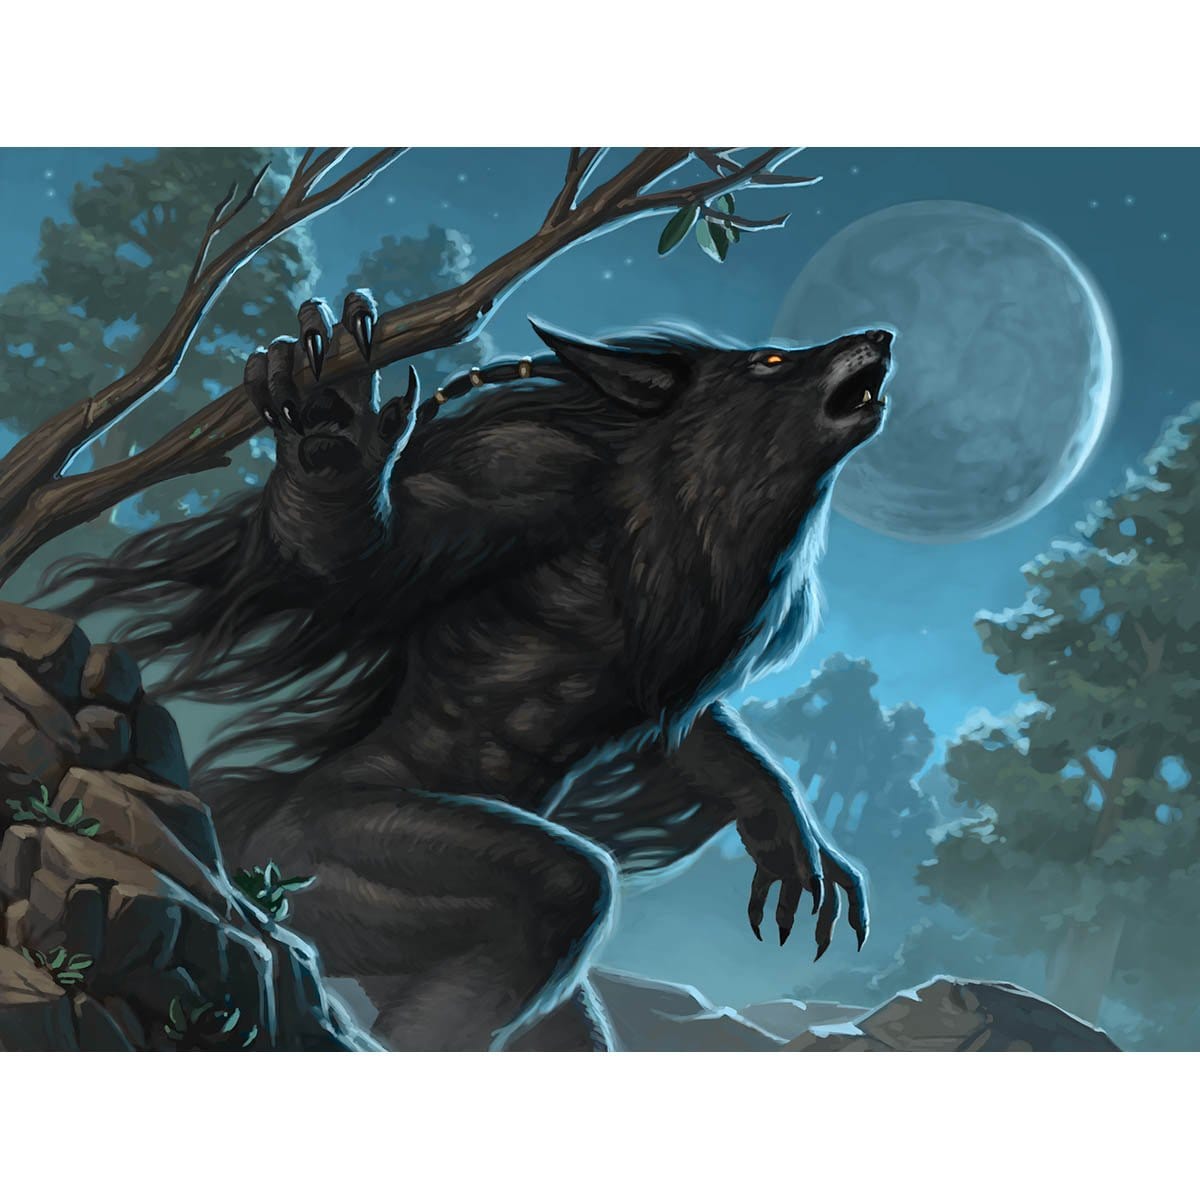 Krallenhorde Howler Print - Print - Original Magic Art - Accessories for Magic the Gathering and other card games